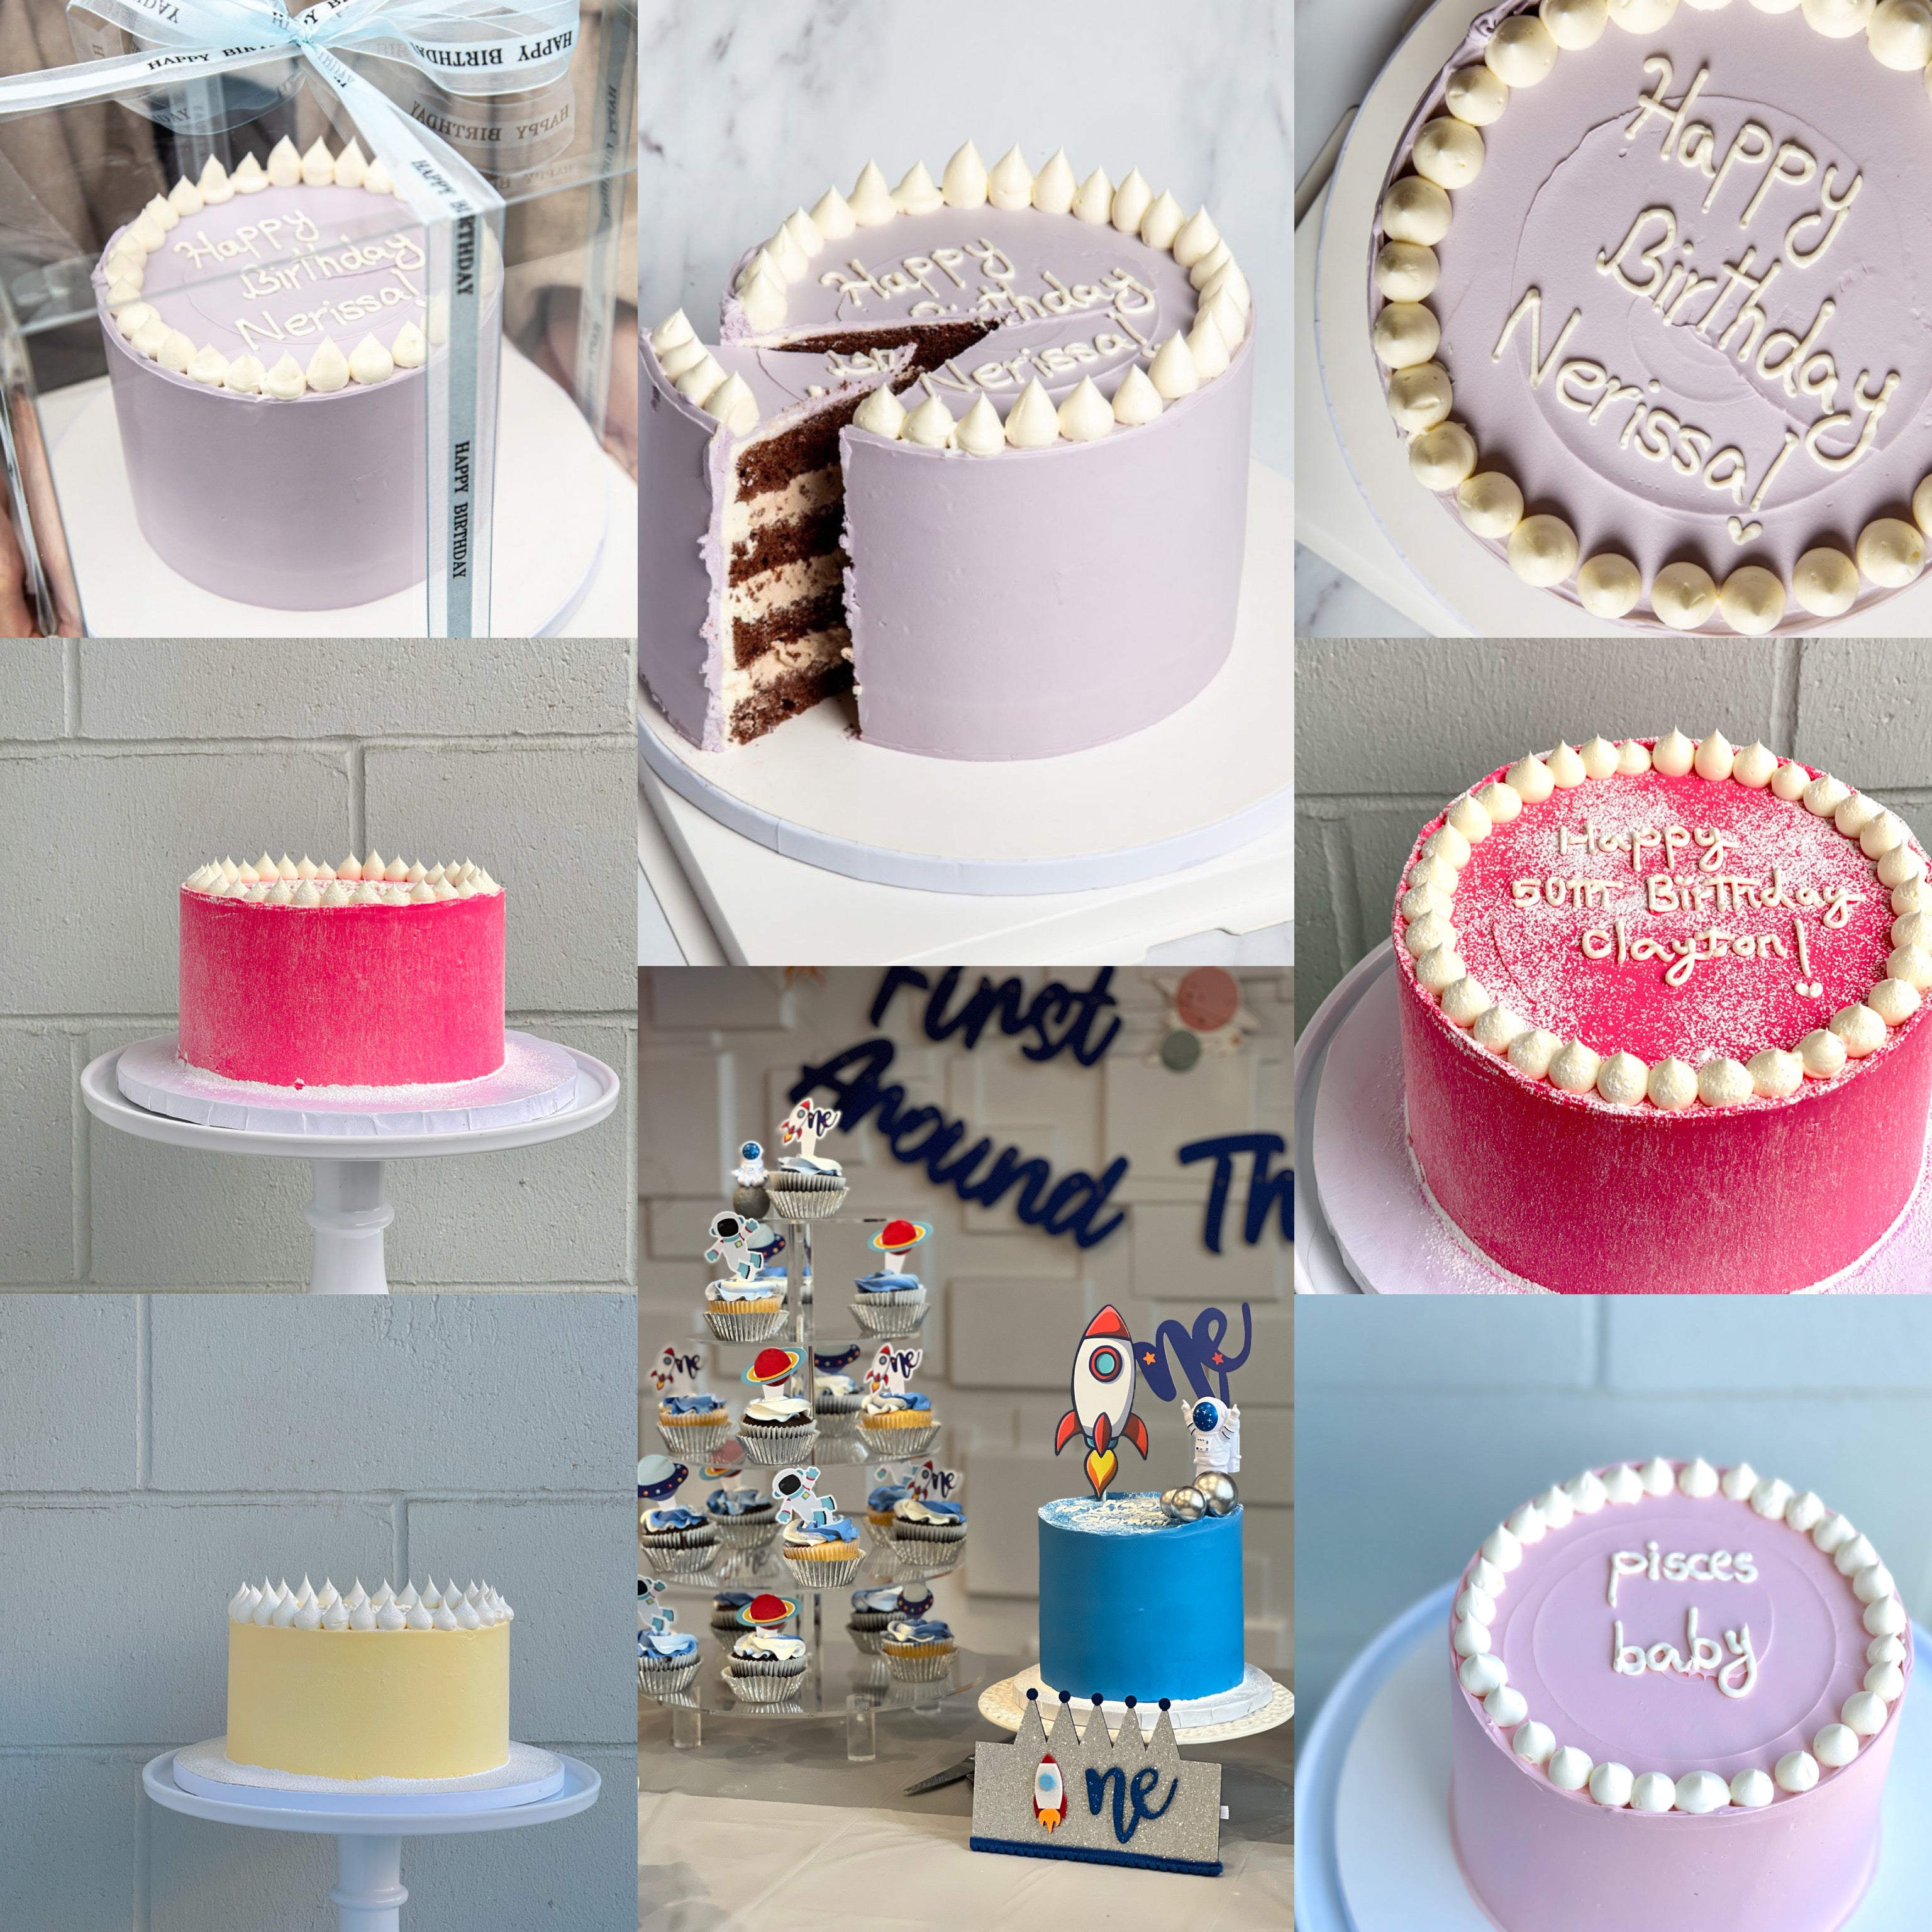 Birthday Cakes: Order Birthday Cake Online, Delivery in 2 hrs